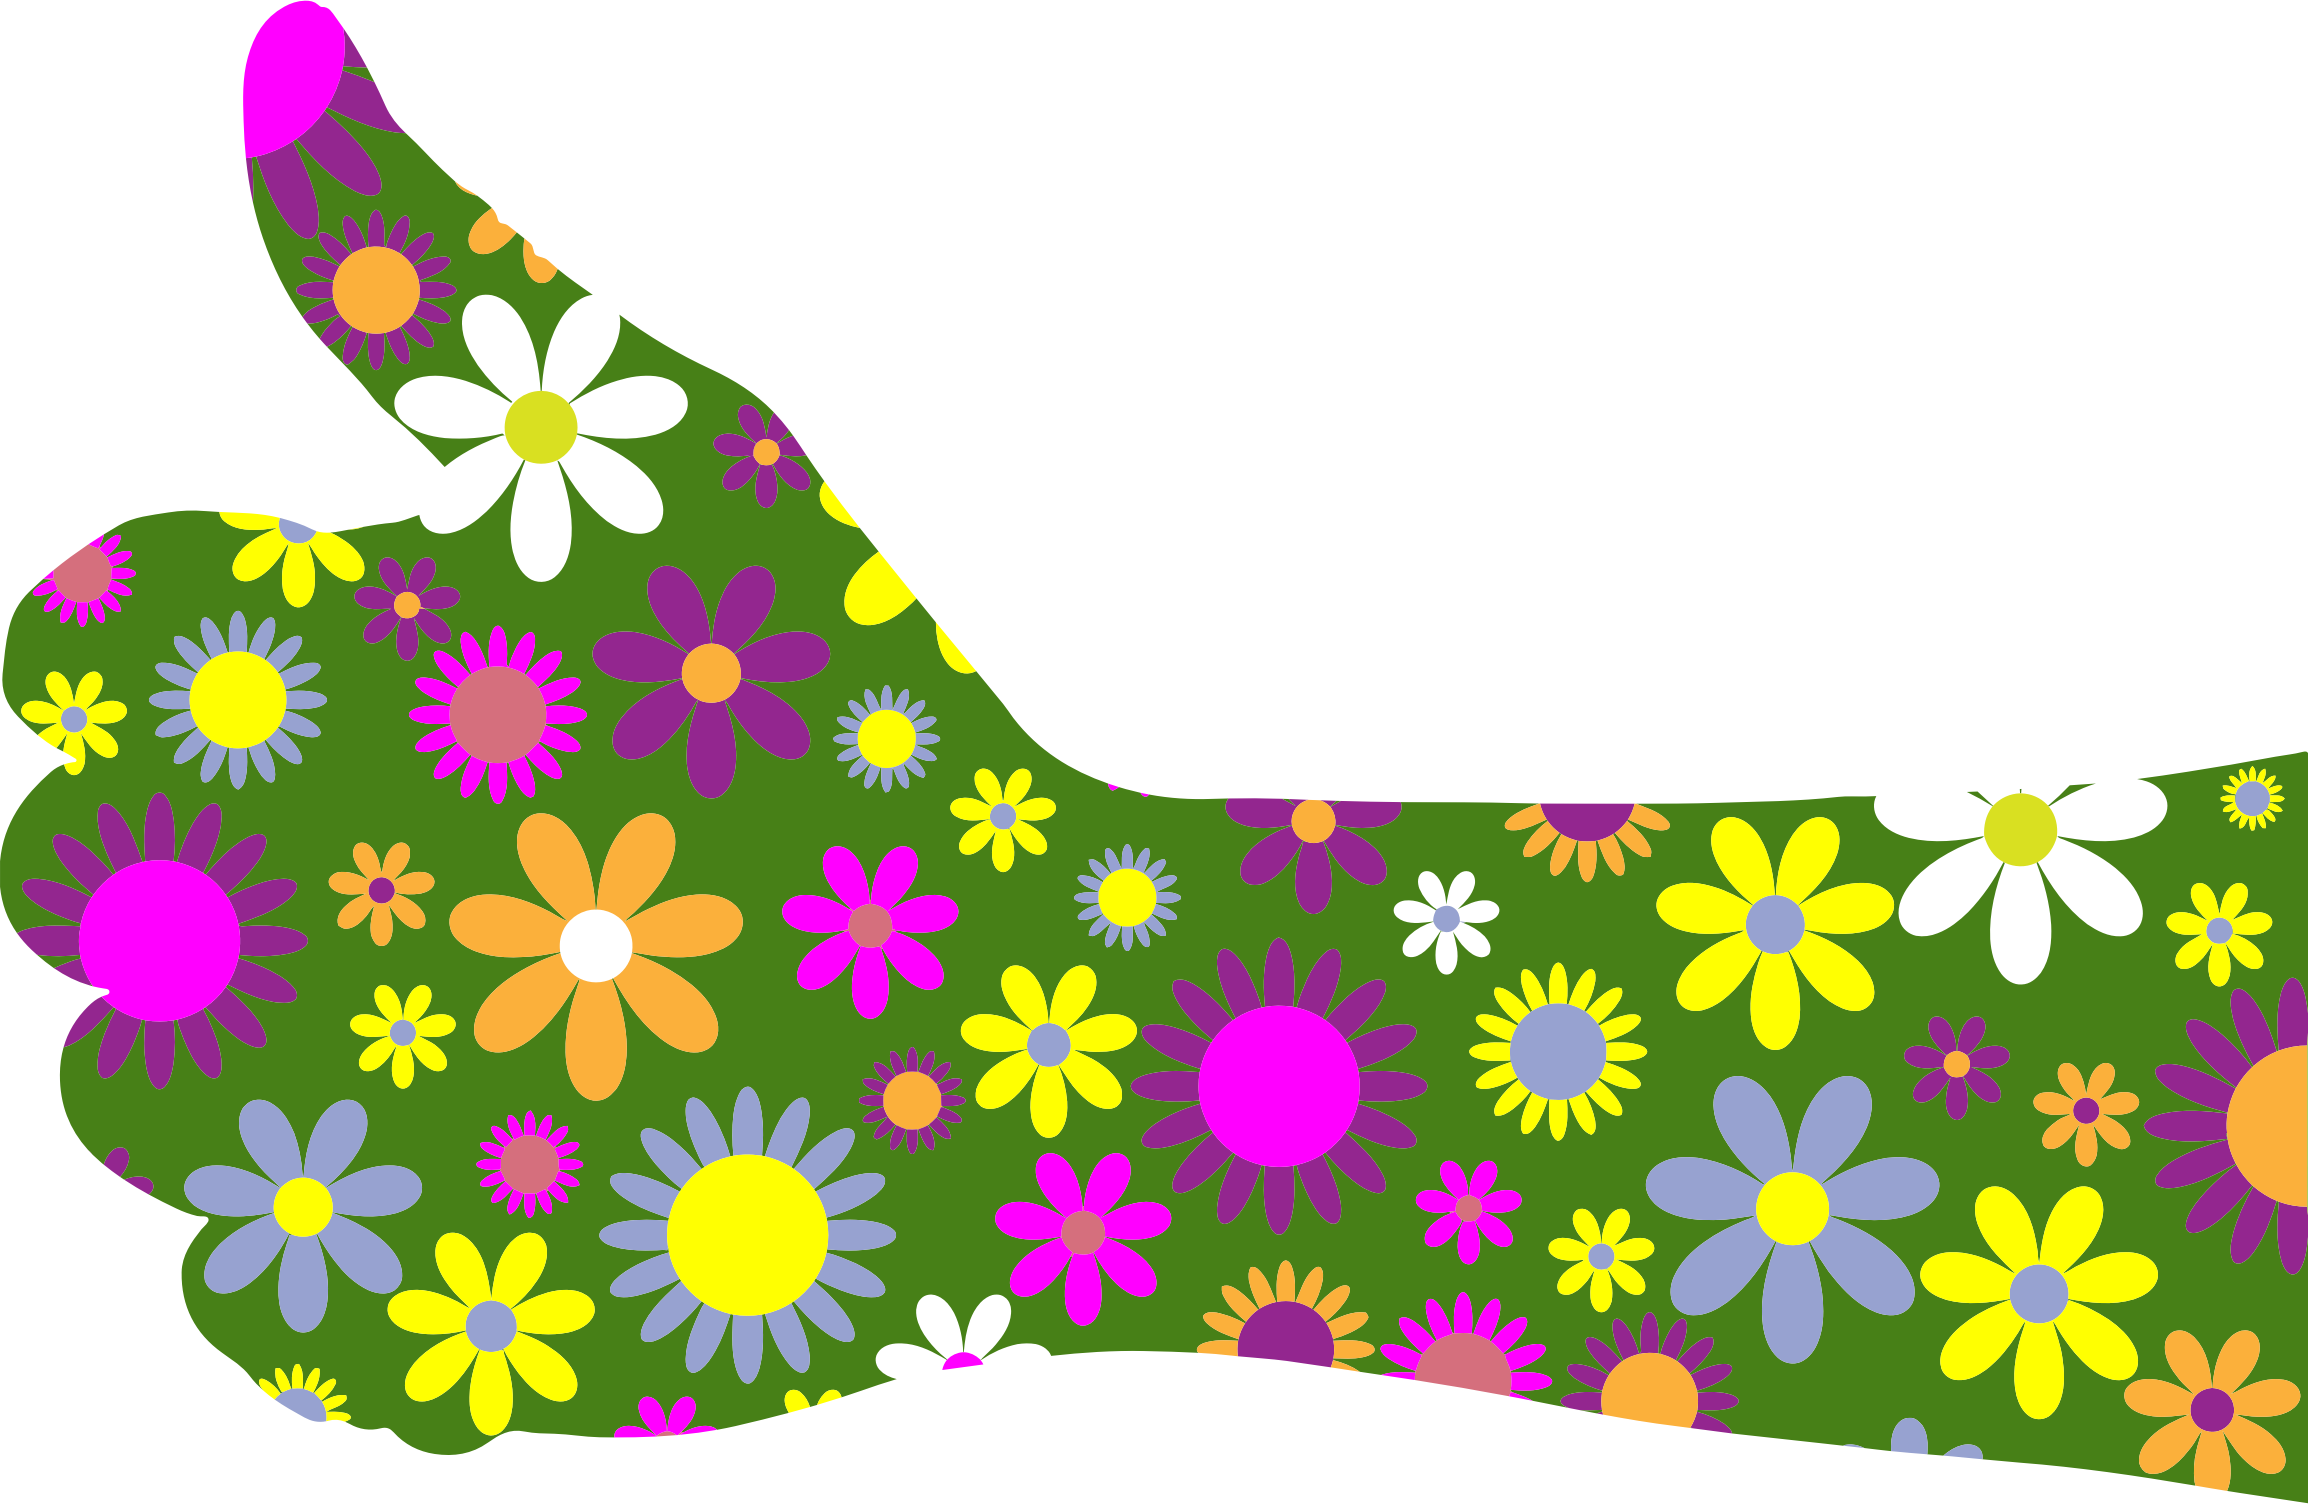 Retro Floral Thumbs Up Arm - Thumbs Up Flowers (2308x1504)